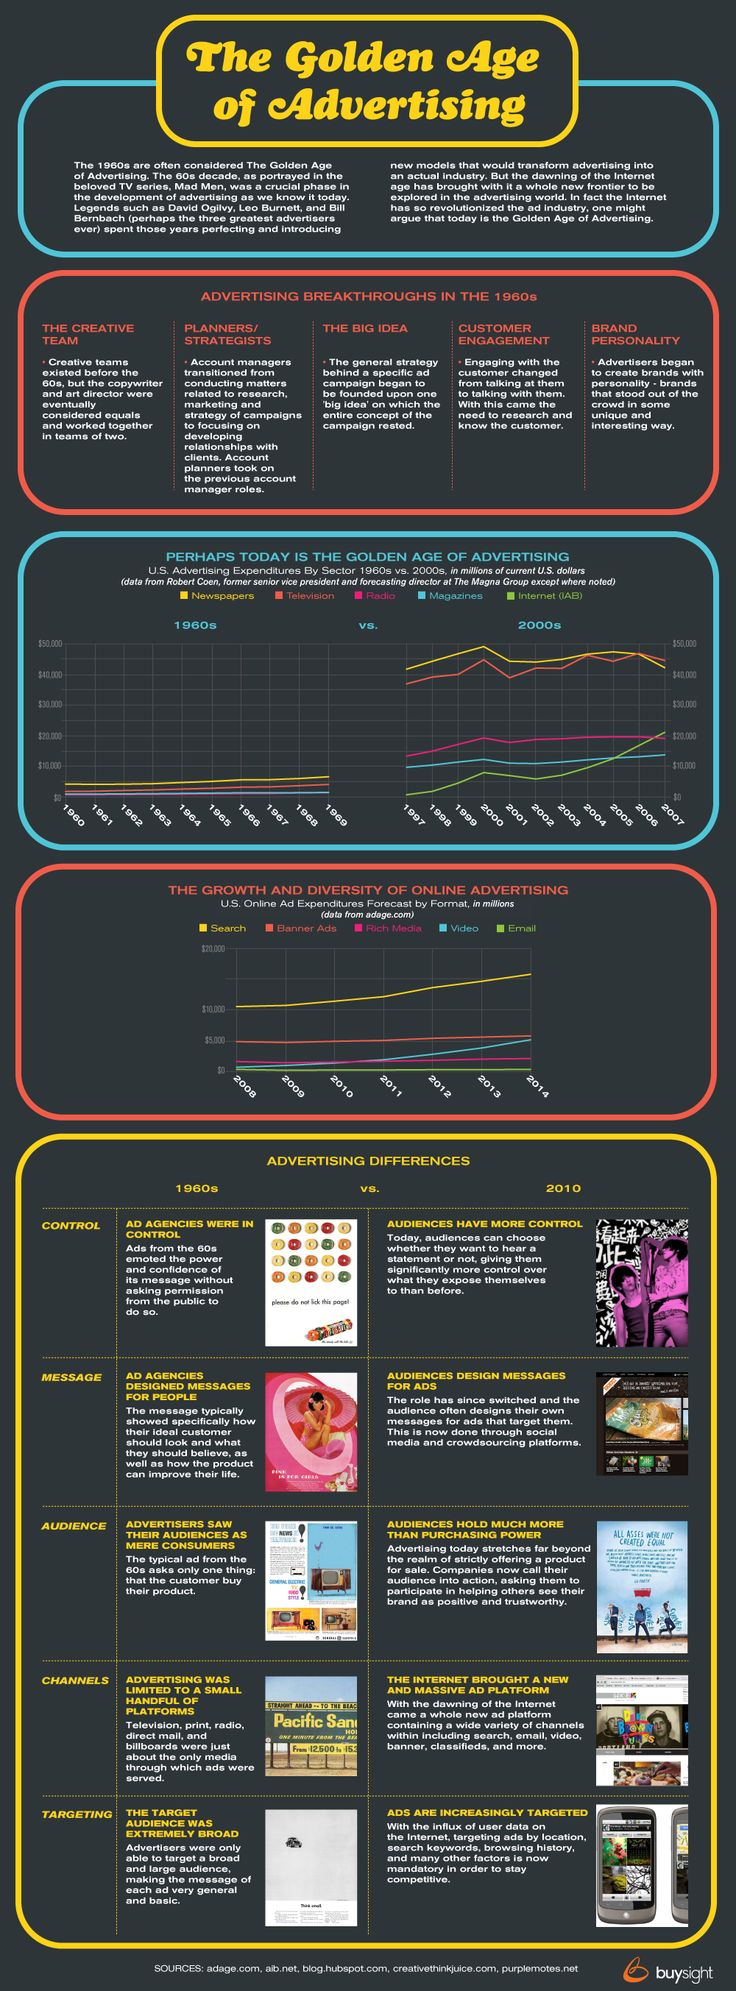 Advertising-Infographics-The-Golden-Age-of-Advertising-c5fl-Category5ive Advertising Infographics : The Golden Age of #Advertising #c5fl #Category5ive c5fl.com